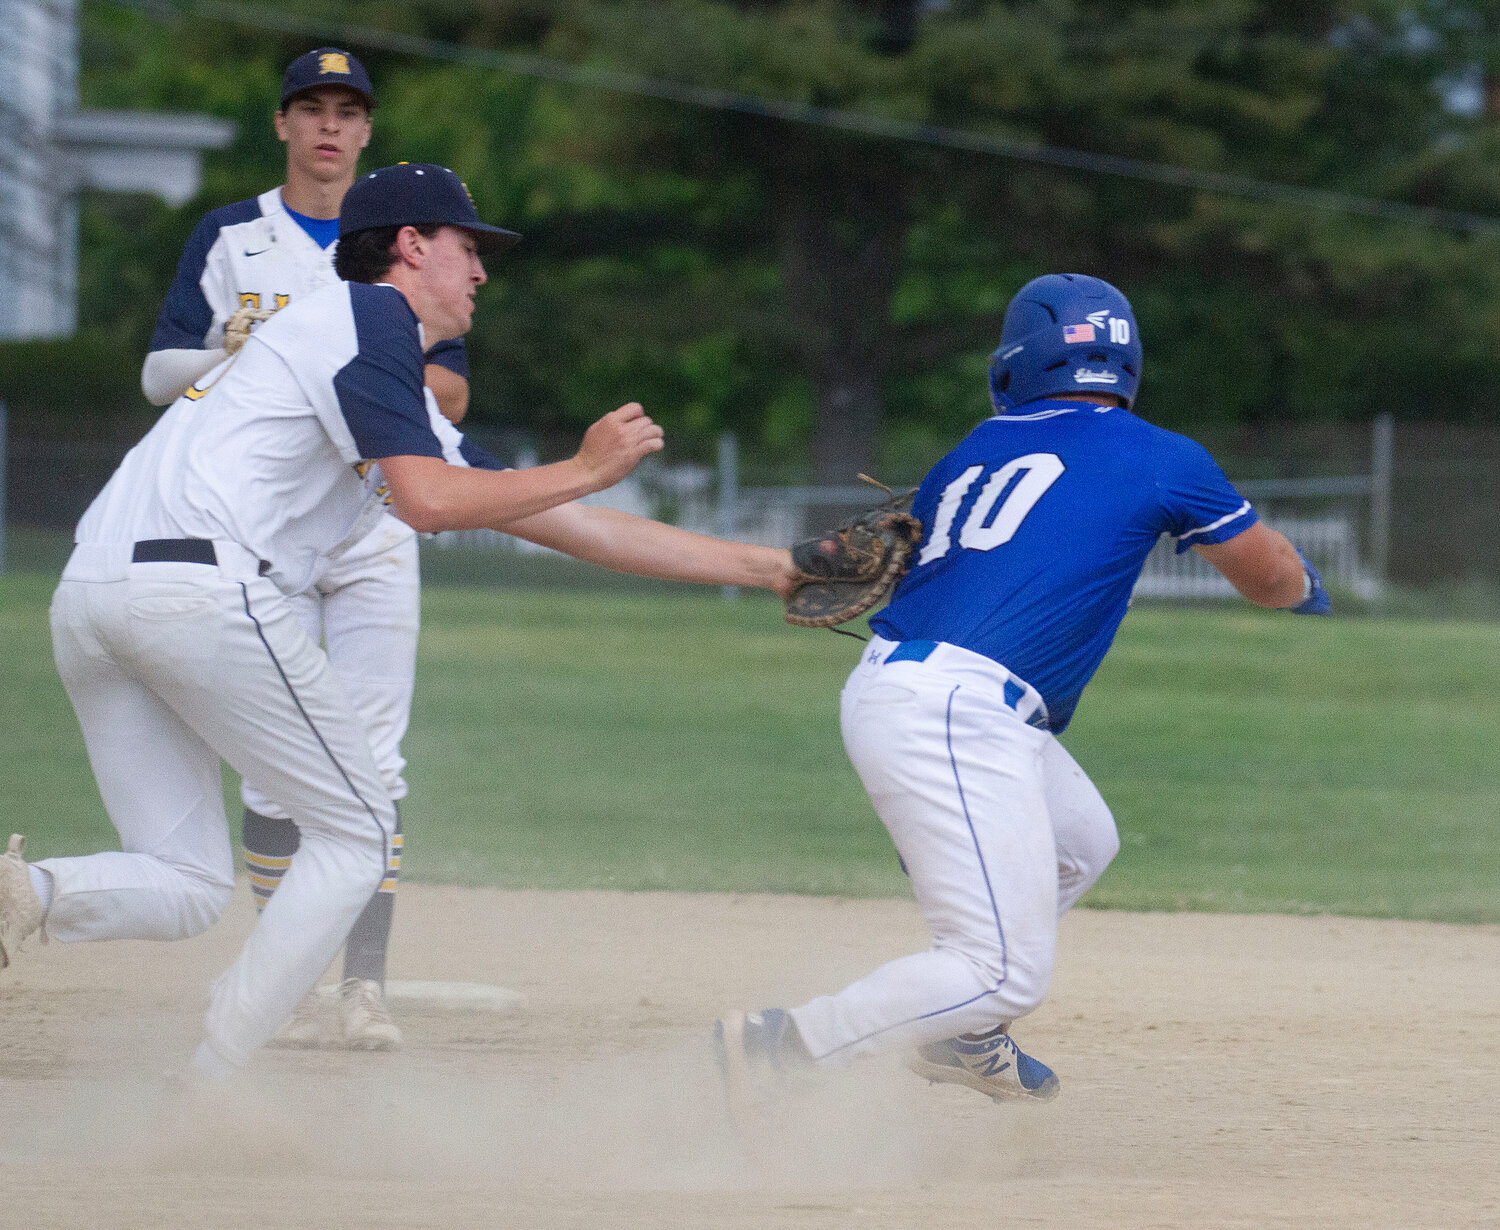 Nick Scandura tags a Middletown baserunner who was caught in a rundown during Friday’s game.